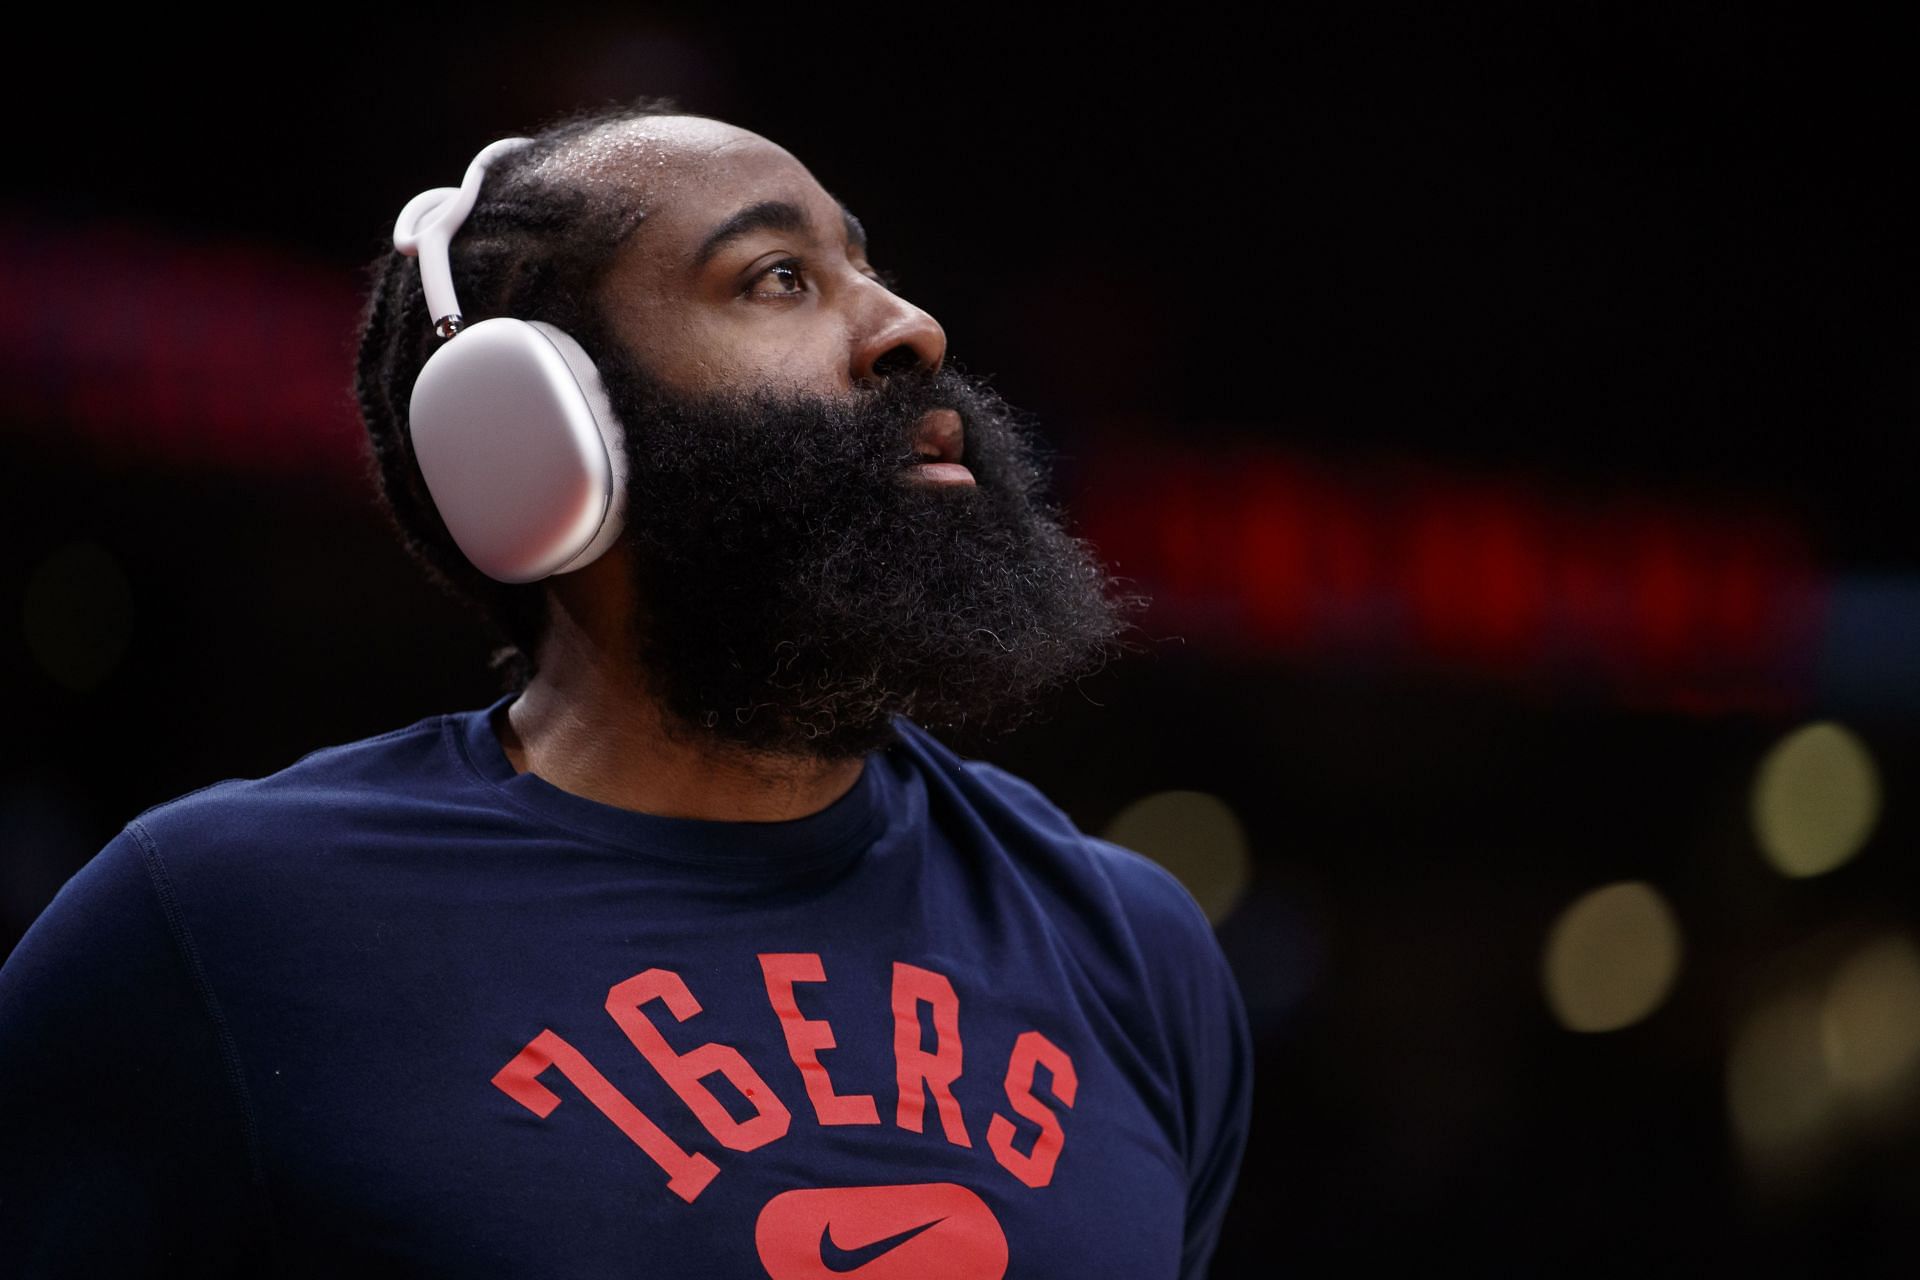 76ers star James Harden will be expected to improve his scoring output